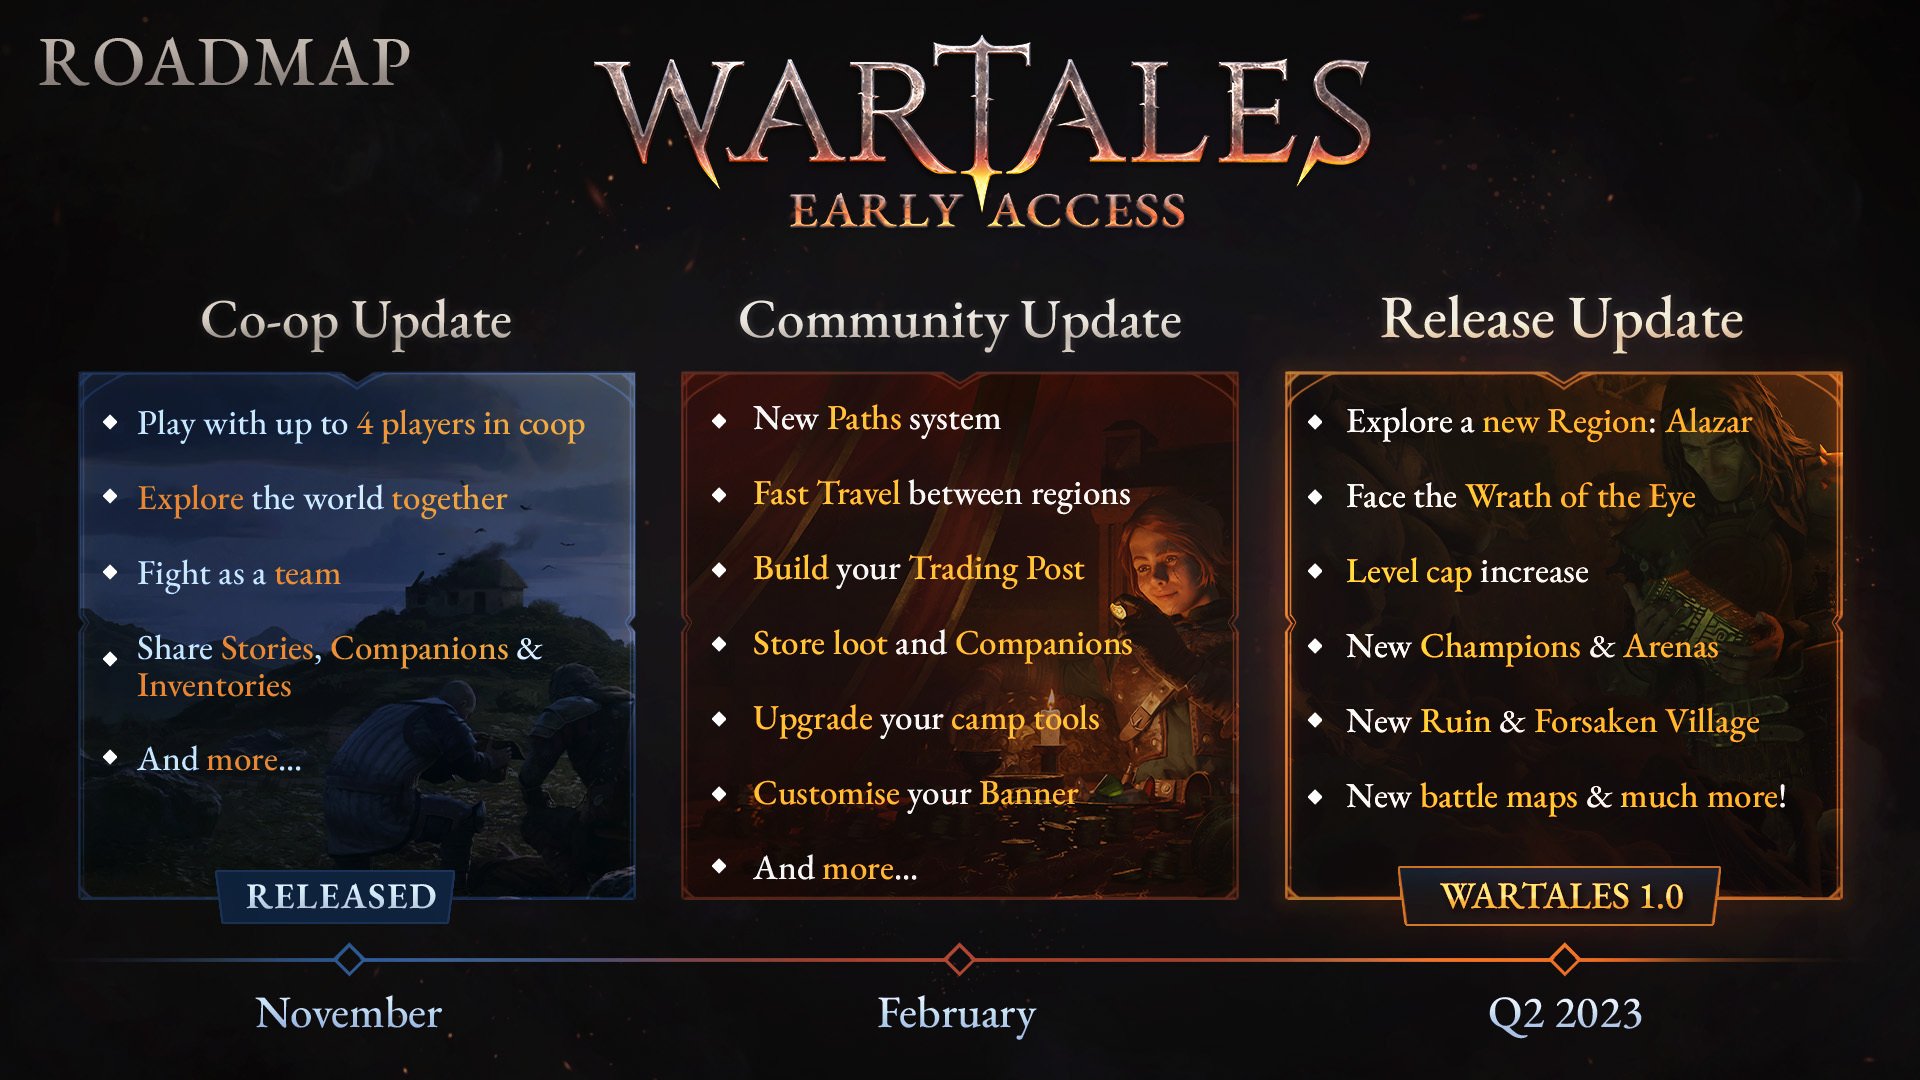 The new and updated Wartales roadmap for 2023